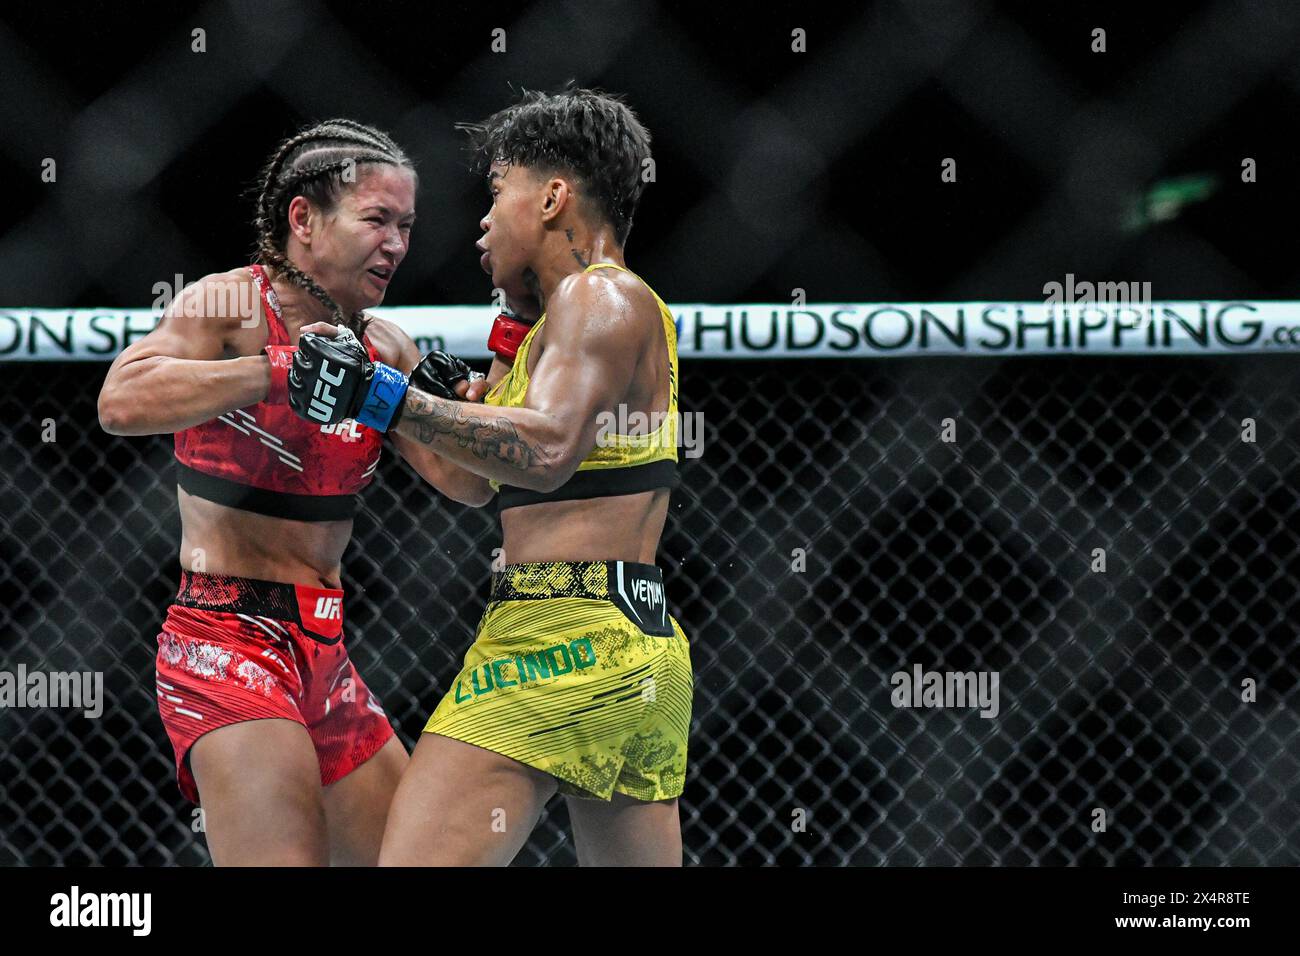 Rio De Janeiro, Brazil. 04th May, 2024. RJ - RIO DE JANEIRO - 05/04/2024 - UFC 301 - Fighter Karolina Kowalkiewicz with gloves in red detail and fighter Iasmin Lucindo with gloves in blue detail during a fight in the women's Strawweight category on the UFC 301 Preliminary Card, held at Jeunesse Arena this Saturday (04). Photo: Thiago Ribeiro/AGIF Credit: AGIF/Alamy Live News Stock Photo